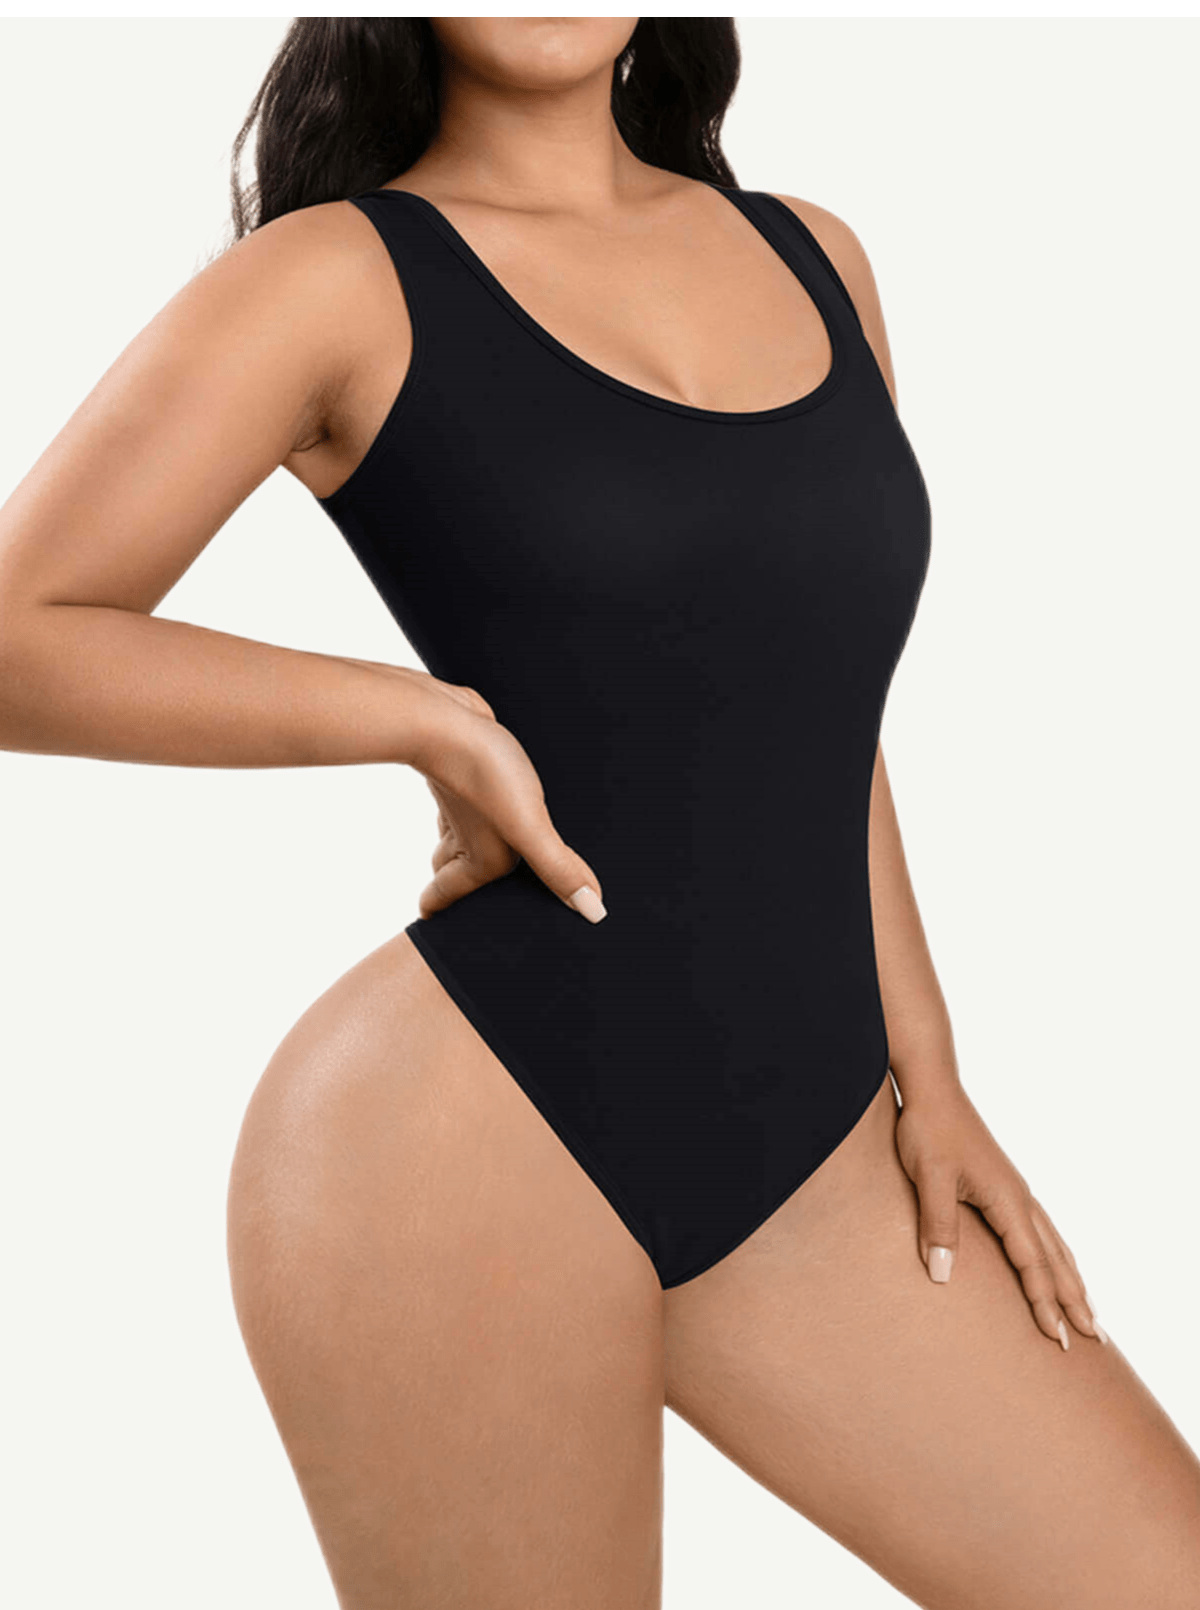 Outside Wearing Tank Top Thong Bodysuit Belly Control – ShapeLounge